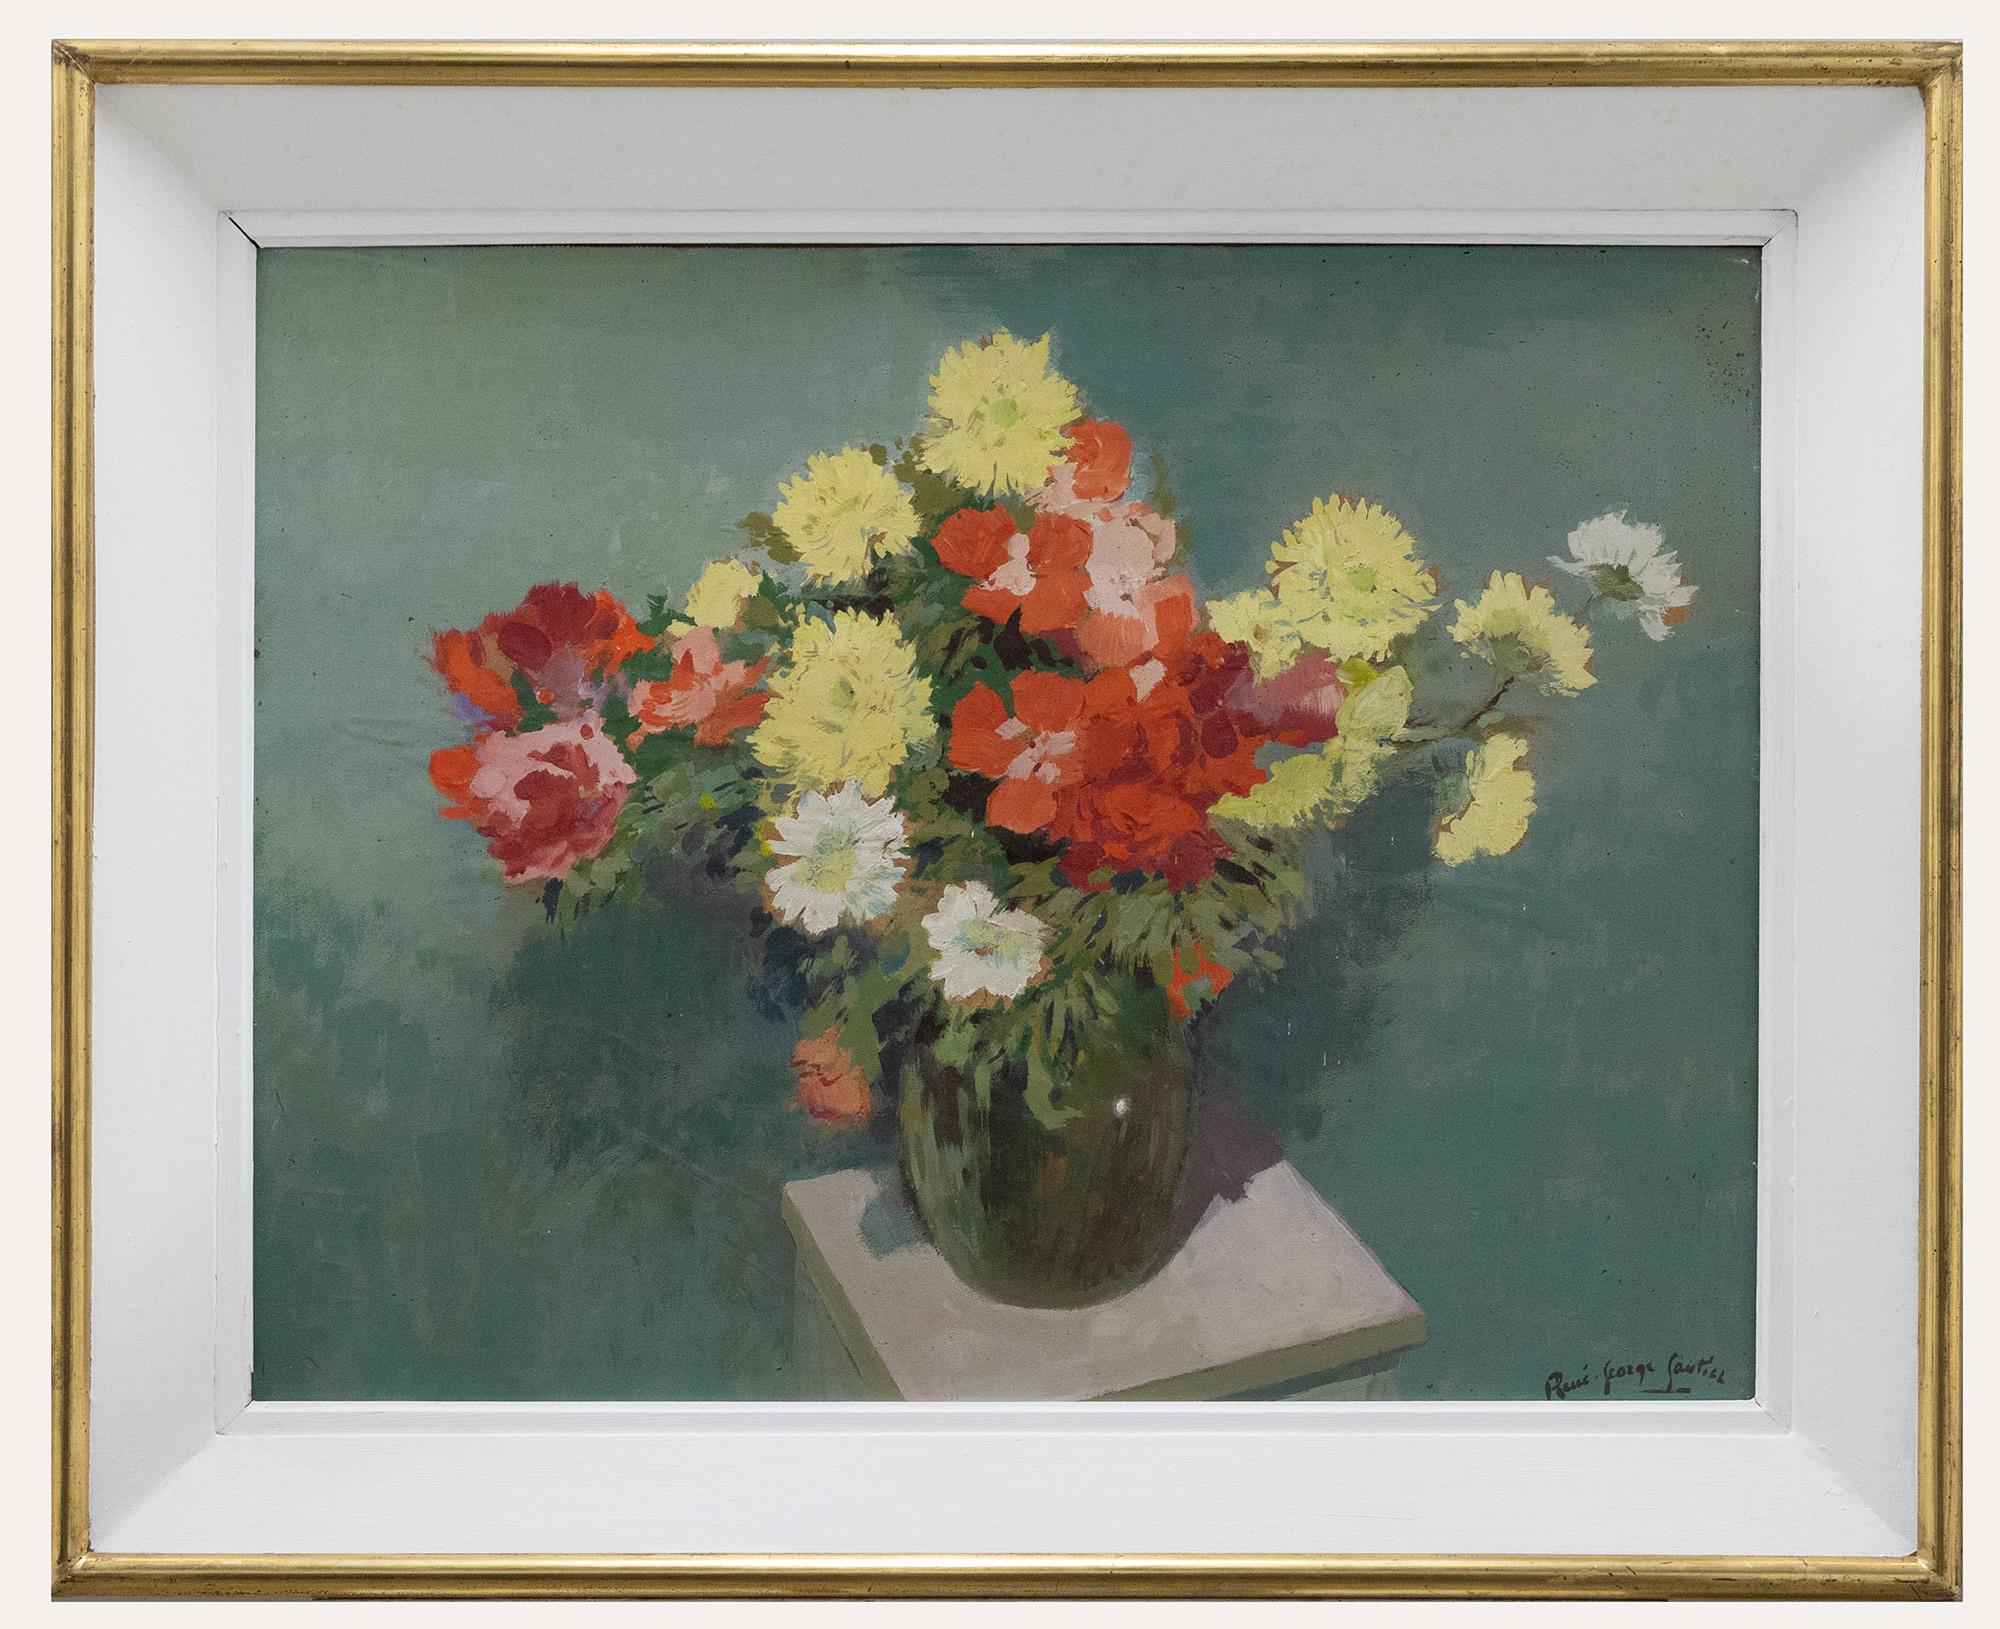 Unknown Still-Life Painting - Rene George Santill - 20th Century Oil, Summer Flowers